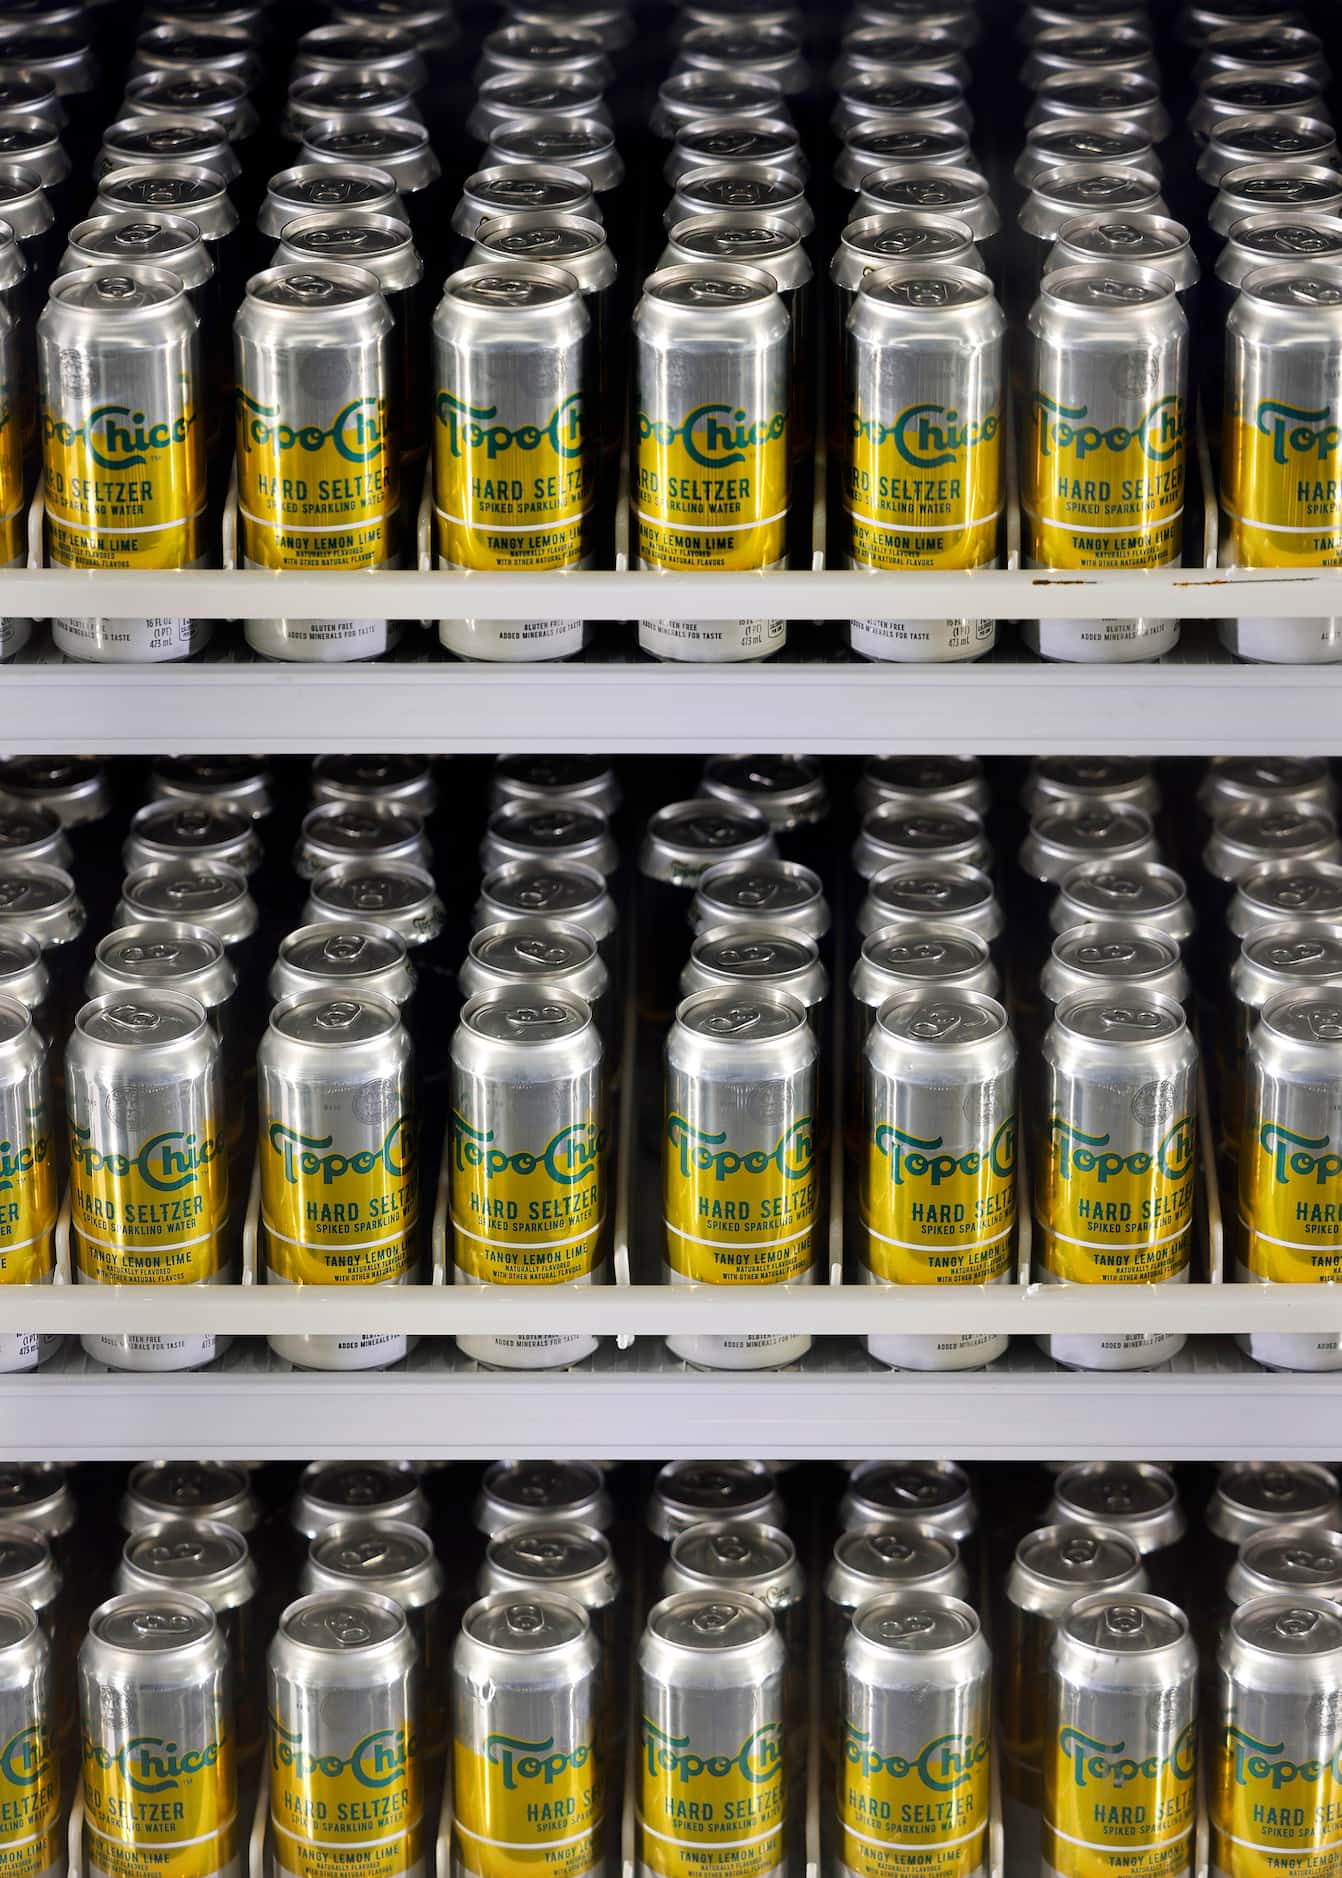 Cans of Topo Chico Hard Seltzer are packed into the Miller LiteHouse walk-in cooler on the...